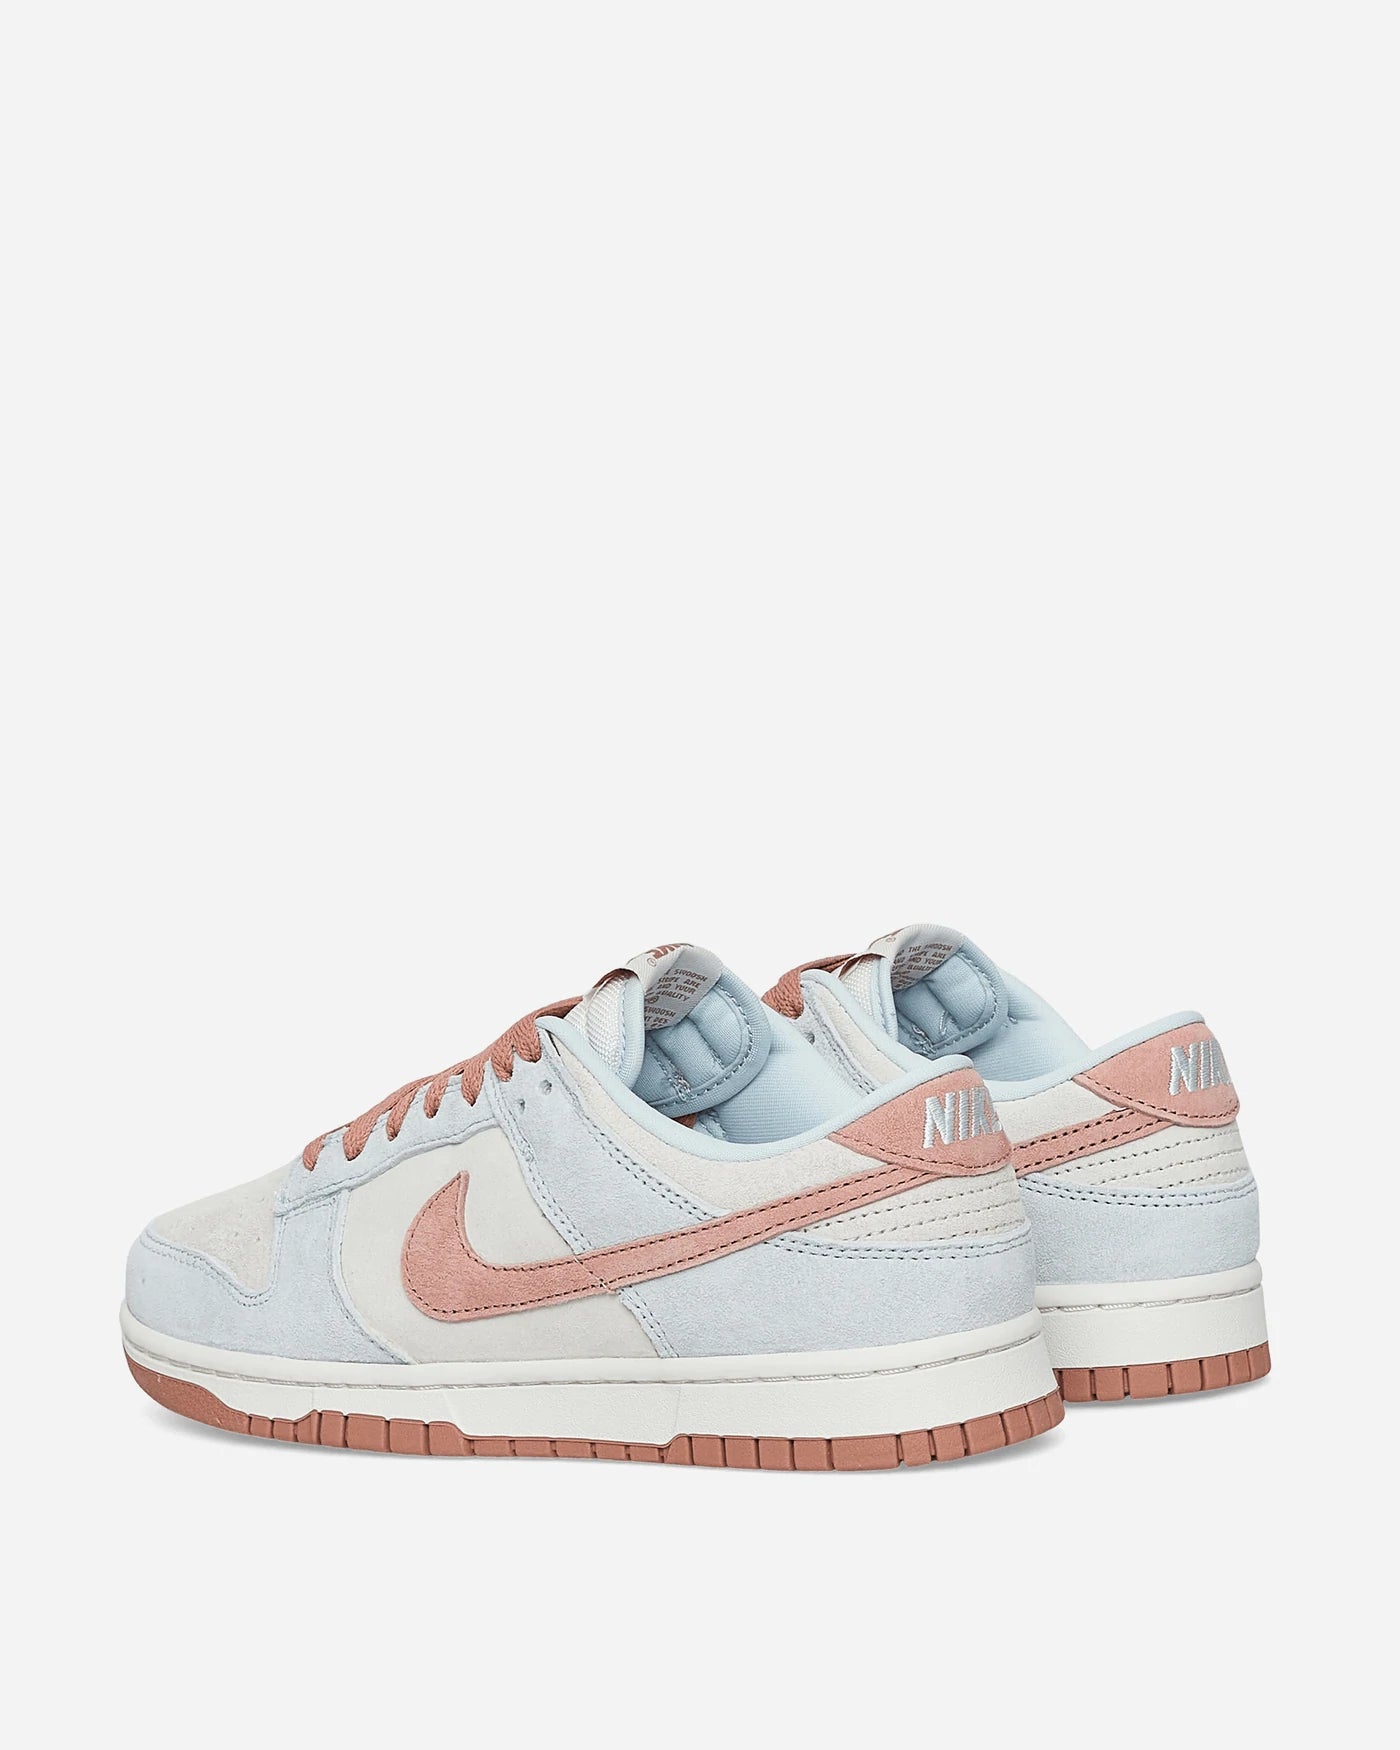 NIKE DUNK LOW FOSSIL ROSE DH7577-001 sneakmarks